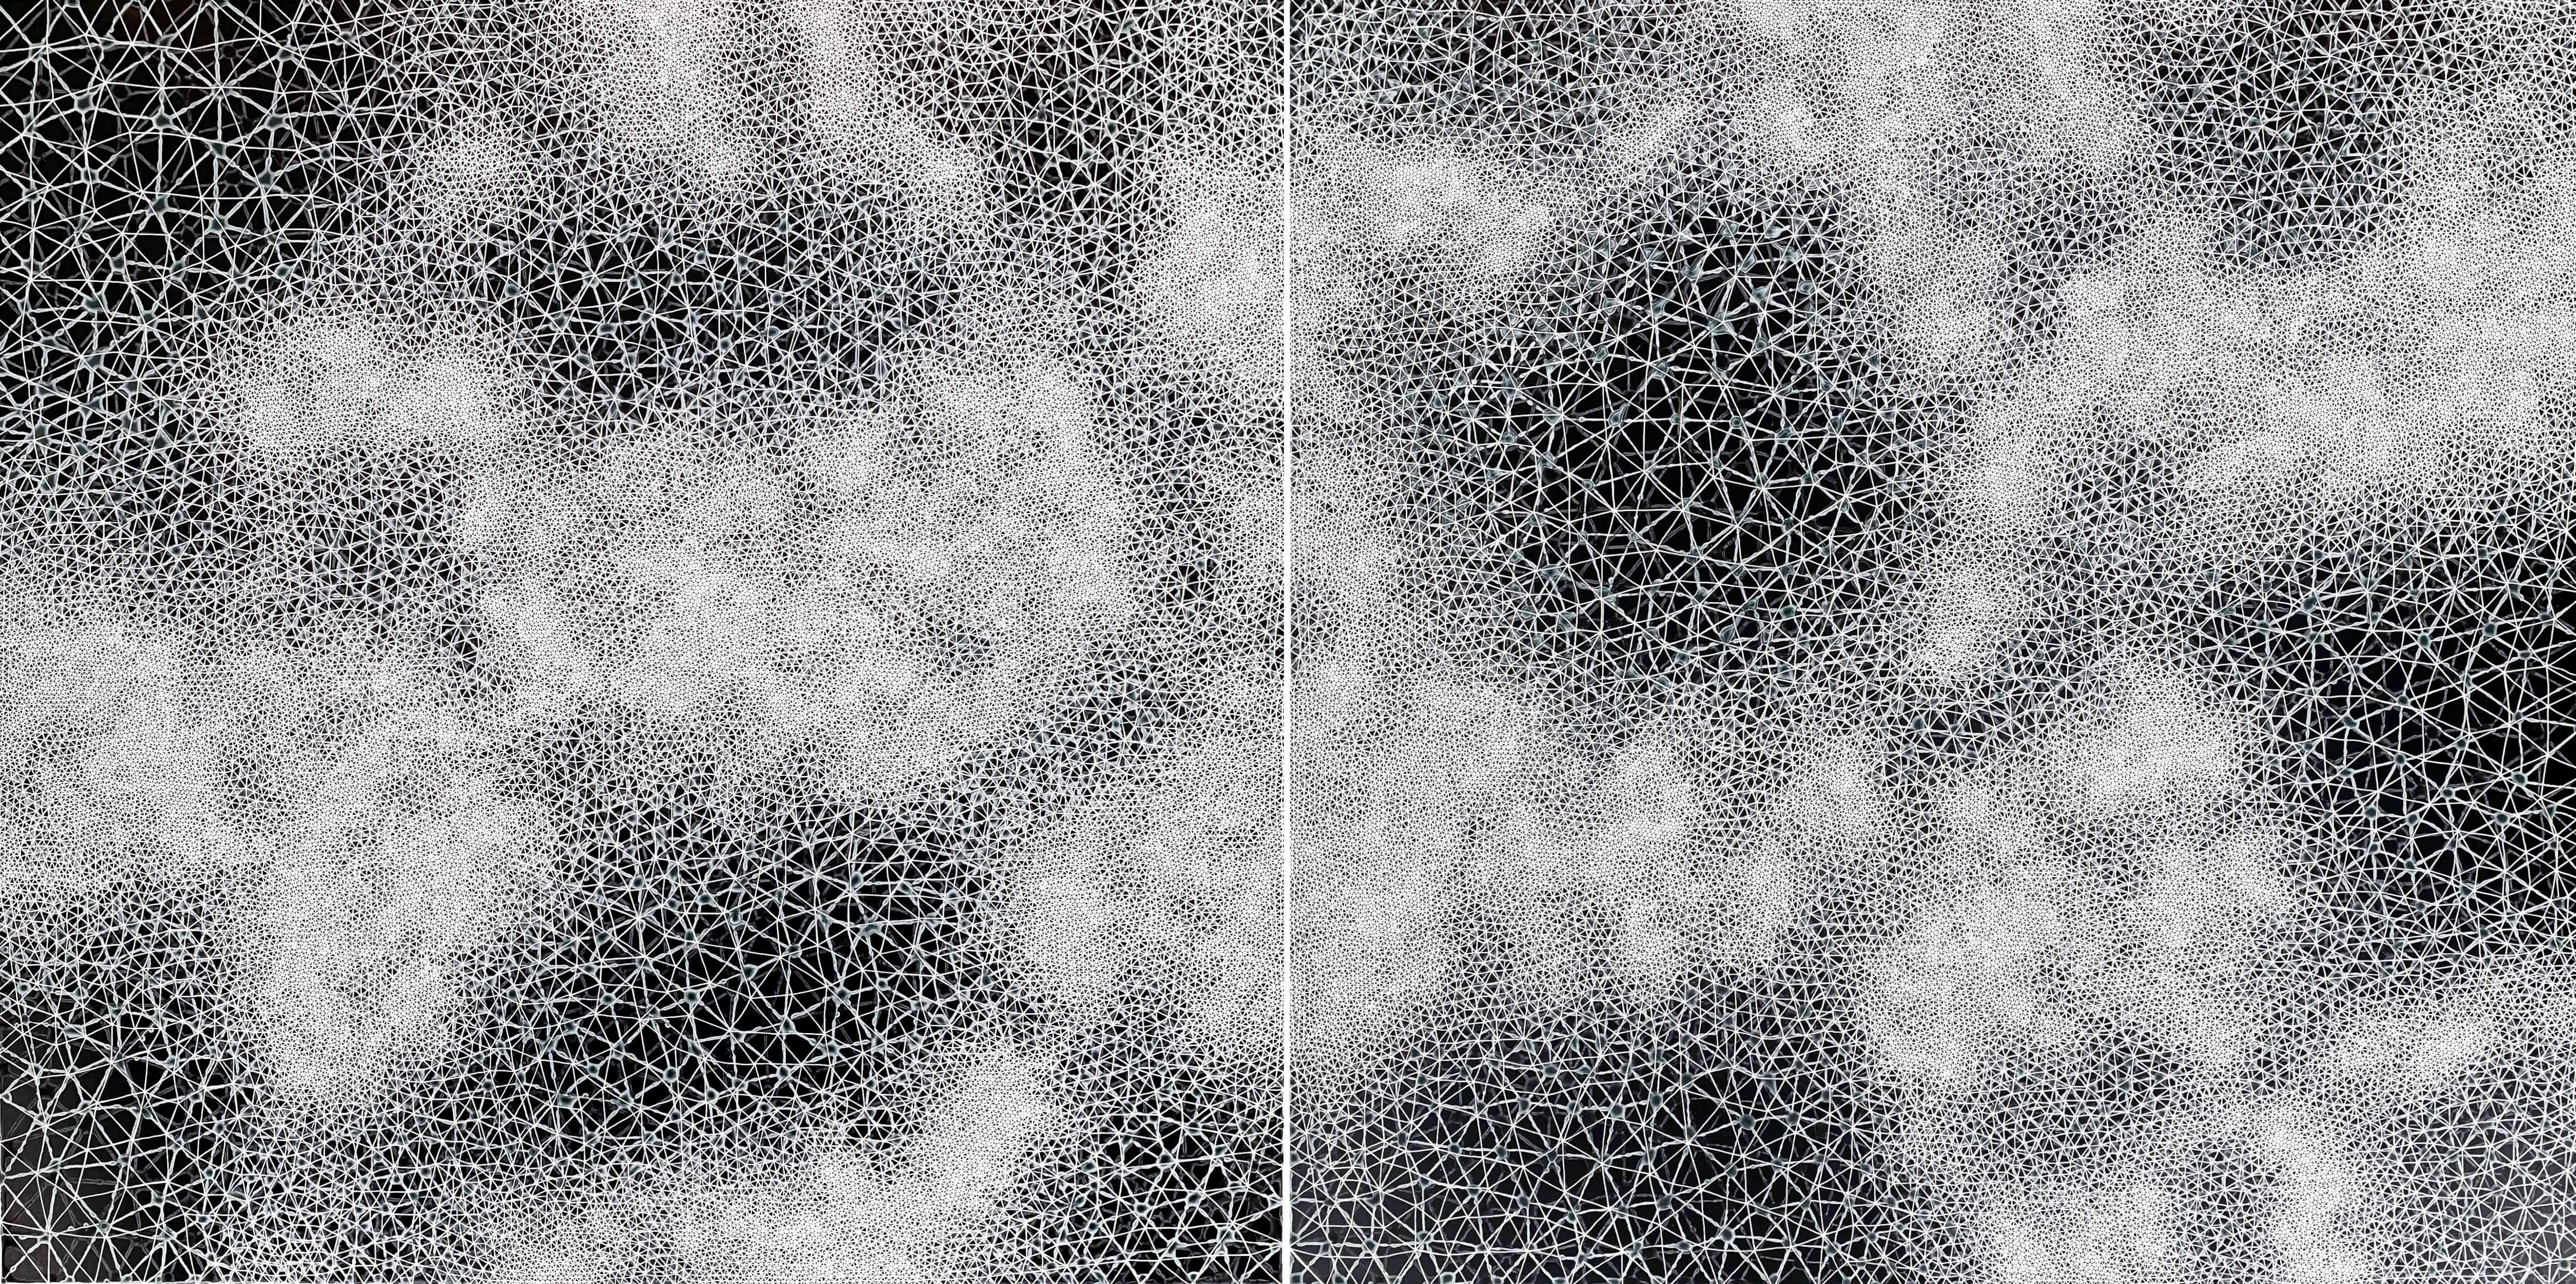 Coherence - black and white abstract geometric diptych painting